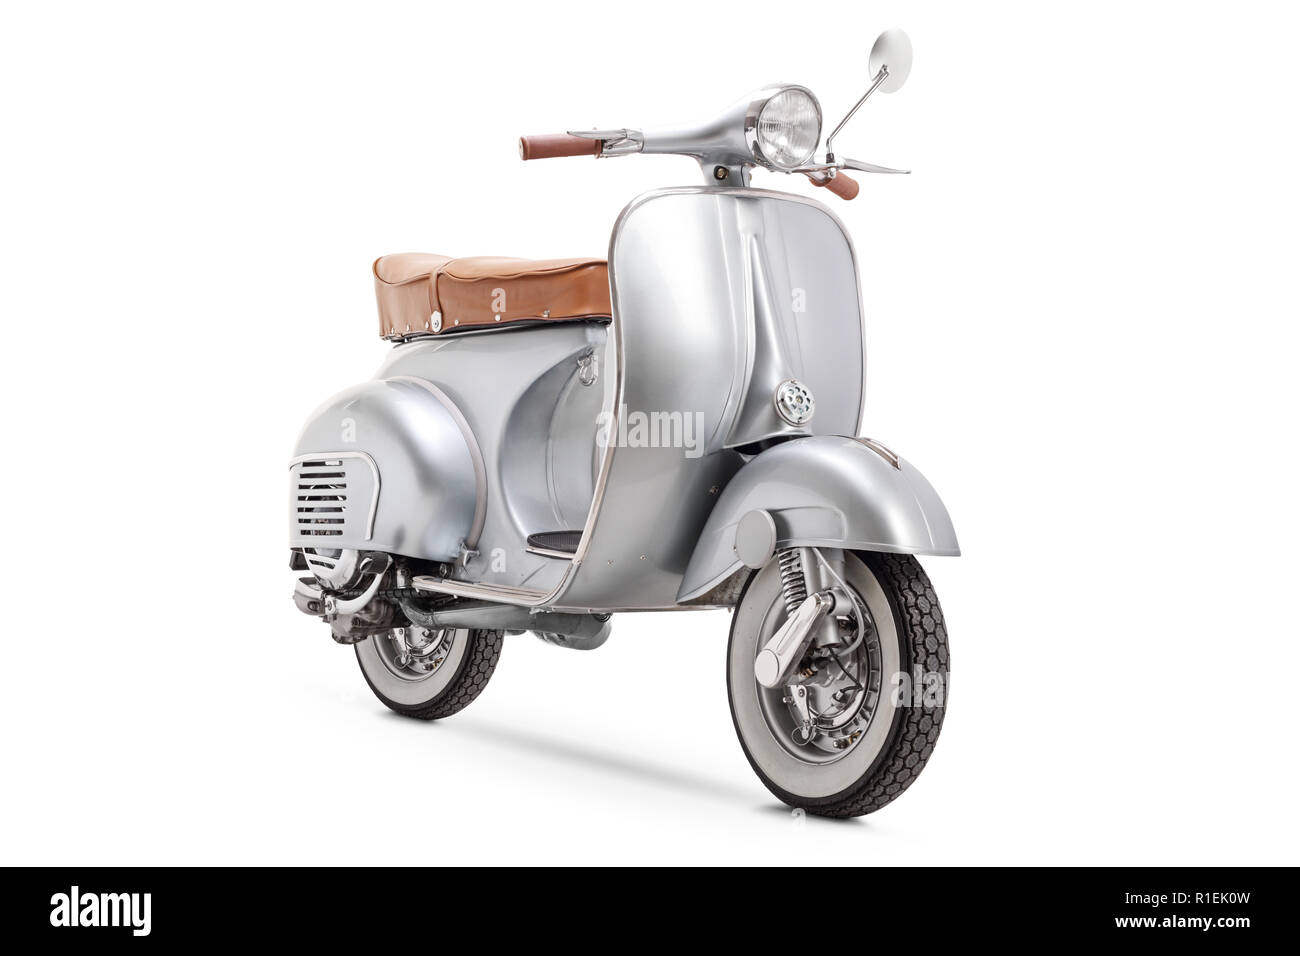 Vintage 1961 VBB 150 Vespa scooter isolated on white background Stock Photo